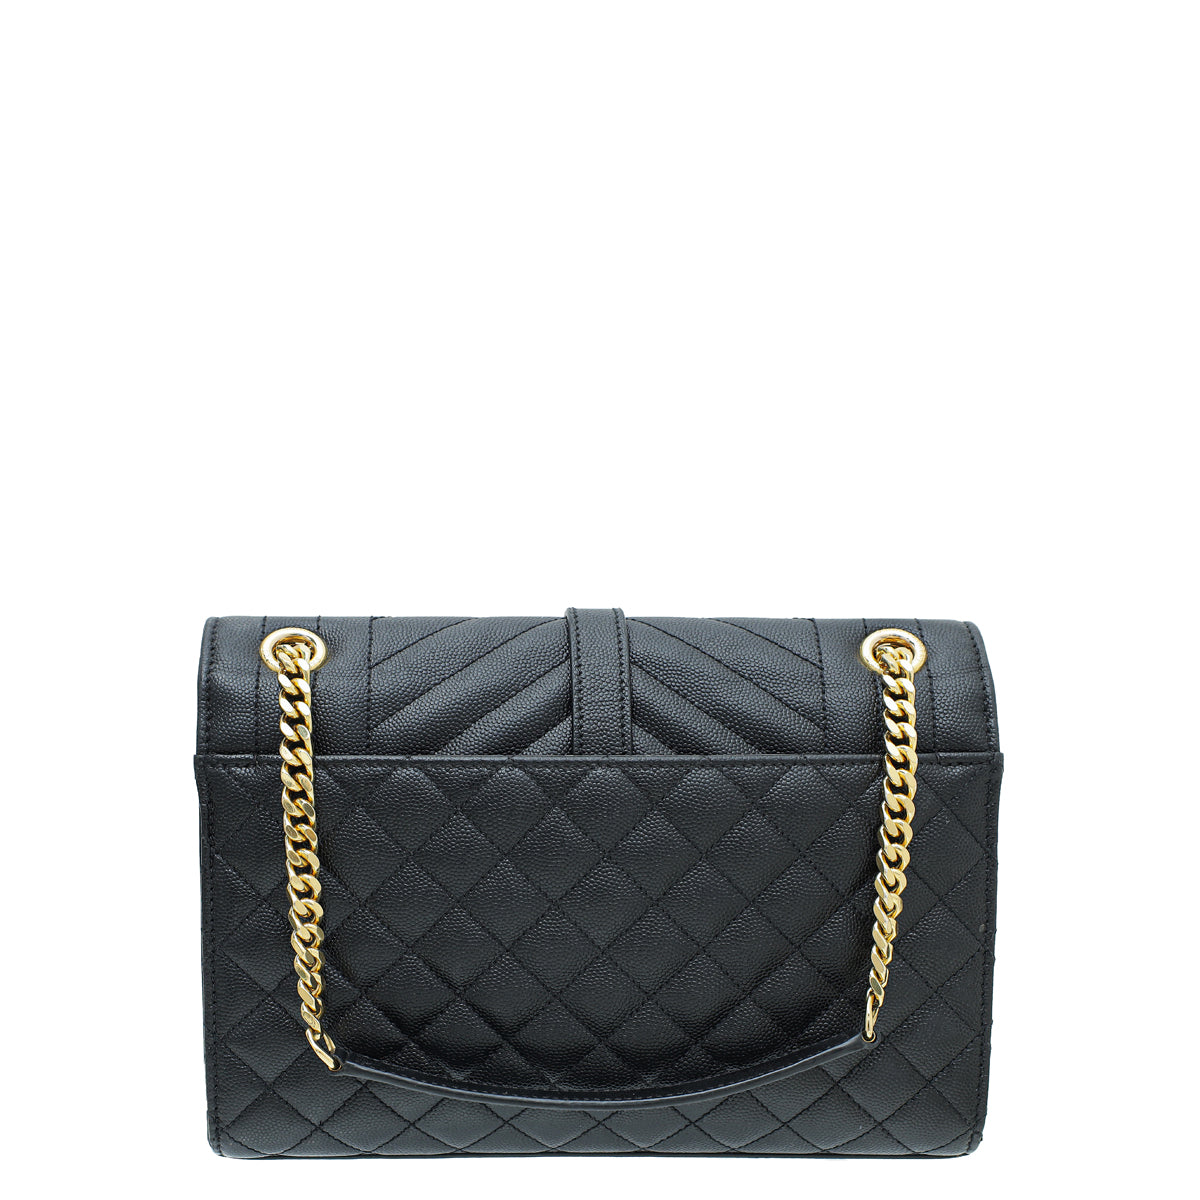 Chanel Grey Quilted Leather Large In-the-Mix Shoulder Bag Chanel | The  Luxury Closet